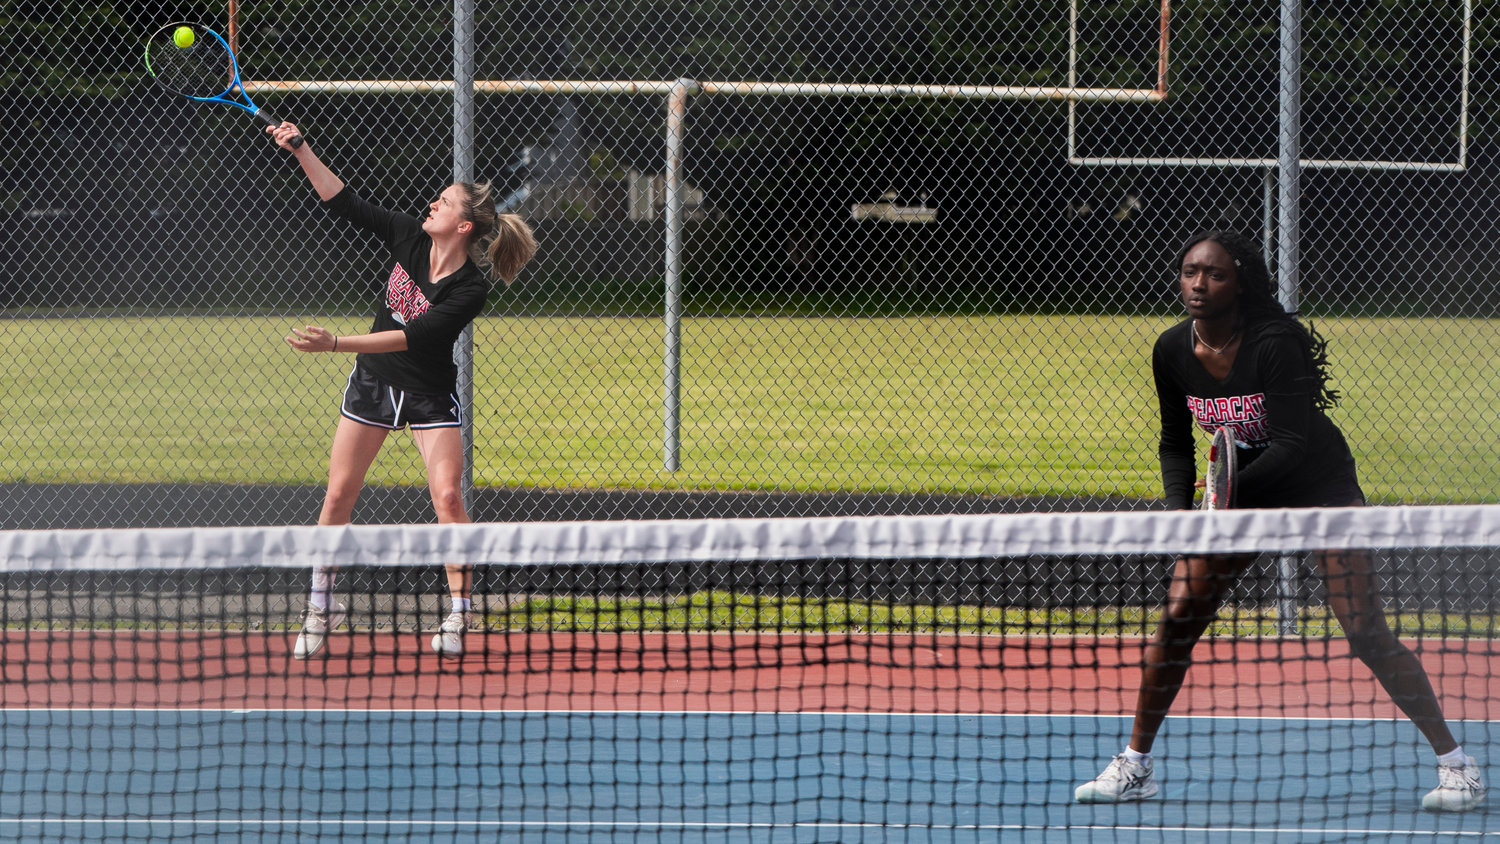 W.F. West’s Kaylynne Dowling serves up a shot alongside her partner Mariama Ceesay during a doubles match at A.G. West Black Hills High School Tuesday afternoon in Tumwater.